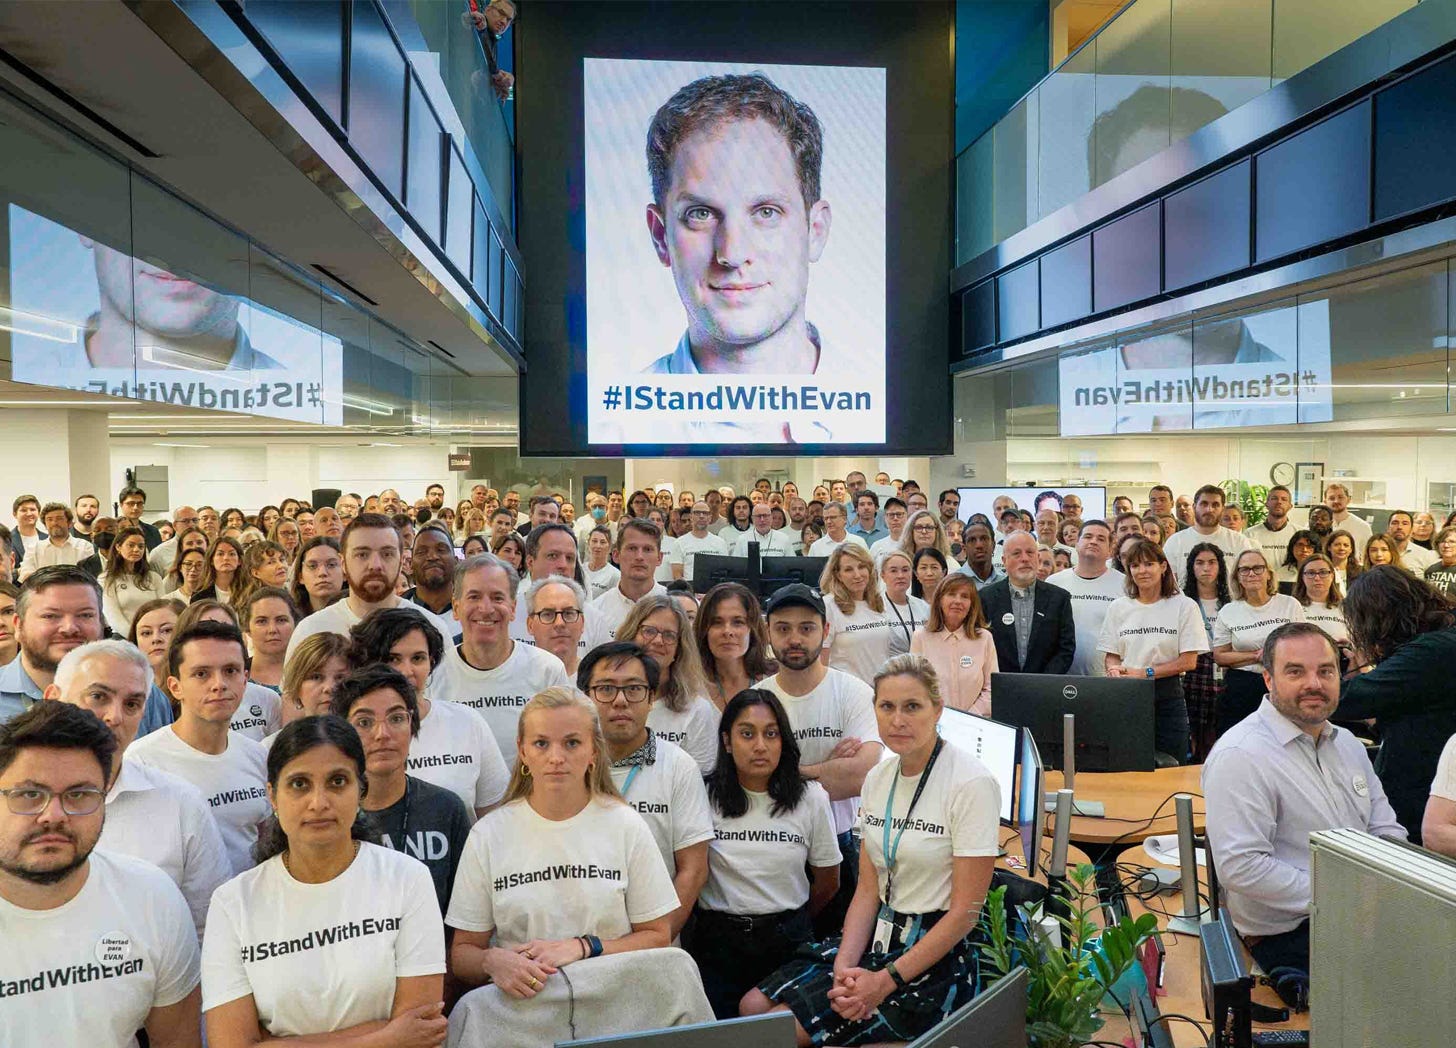 A crowd in the Wall Street Journal newsroom gathers around a screen projecting a headshot of reporter Evan Gershokovich and the hashtag #IStandWithEvan